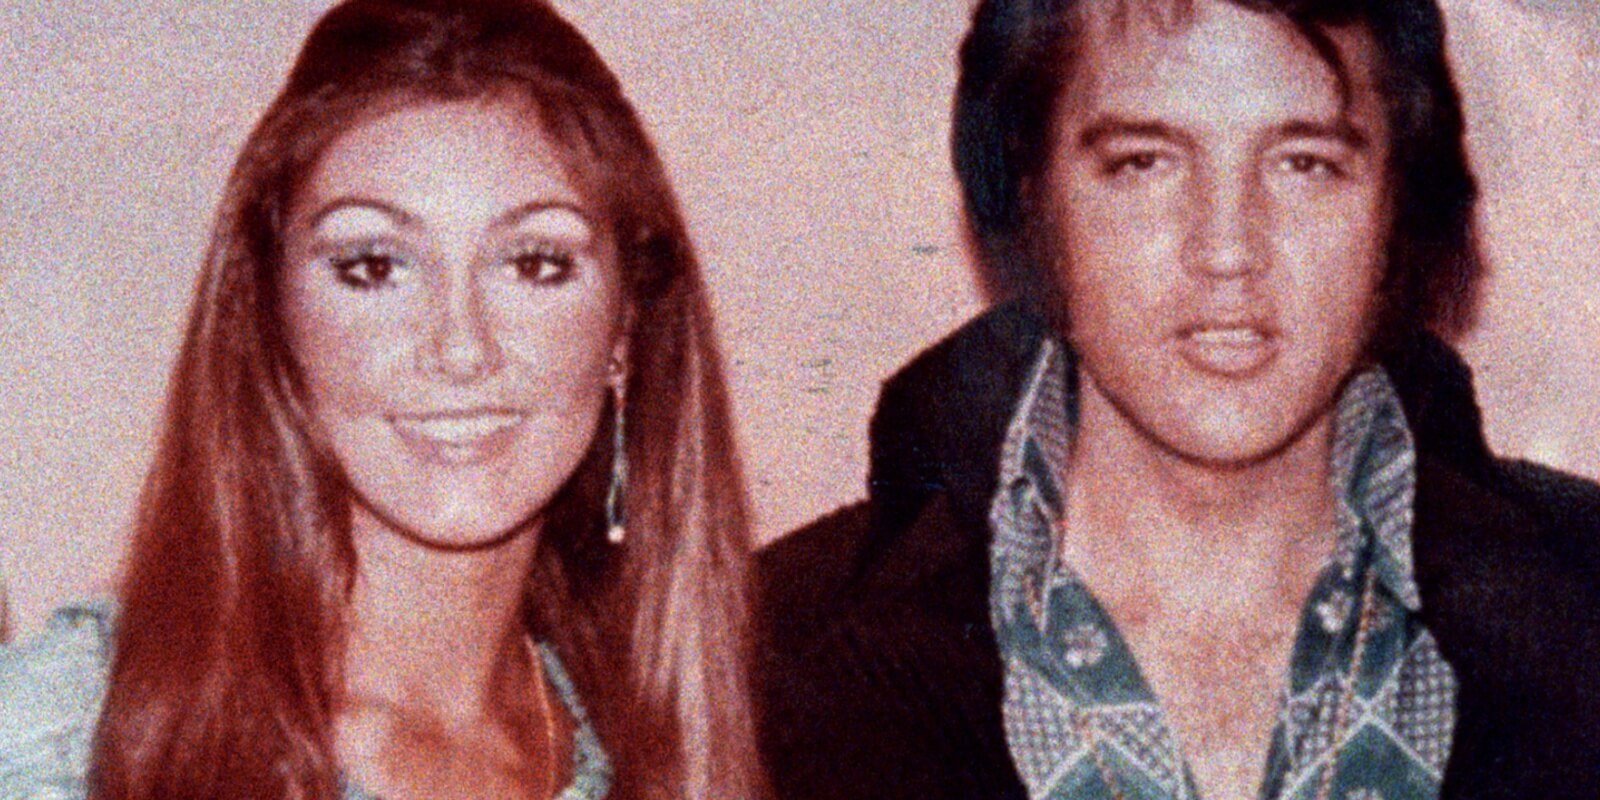 Linda Thompson and Elvis Presley pose together in the early 1970s.